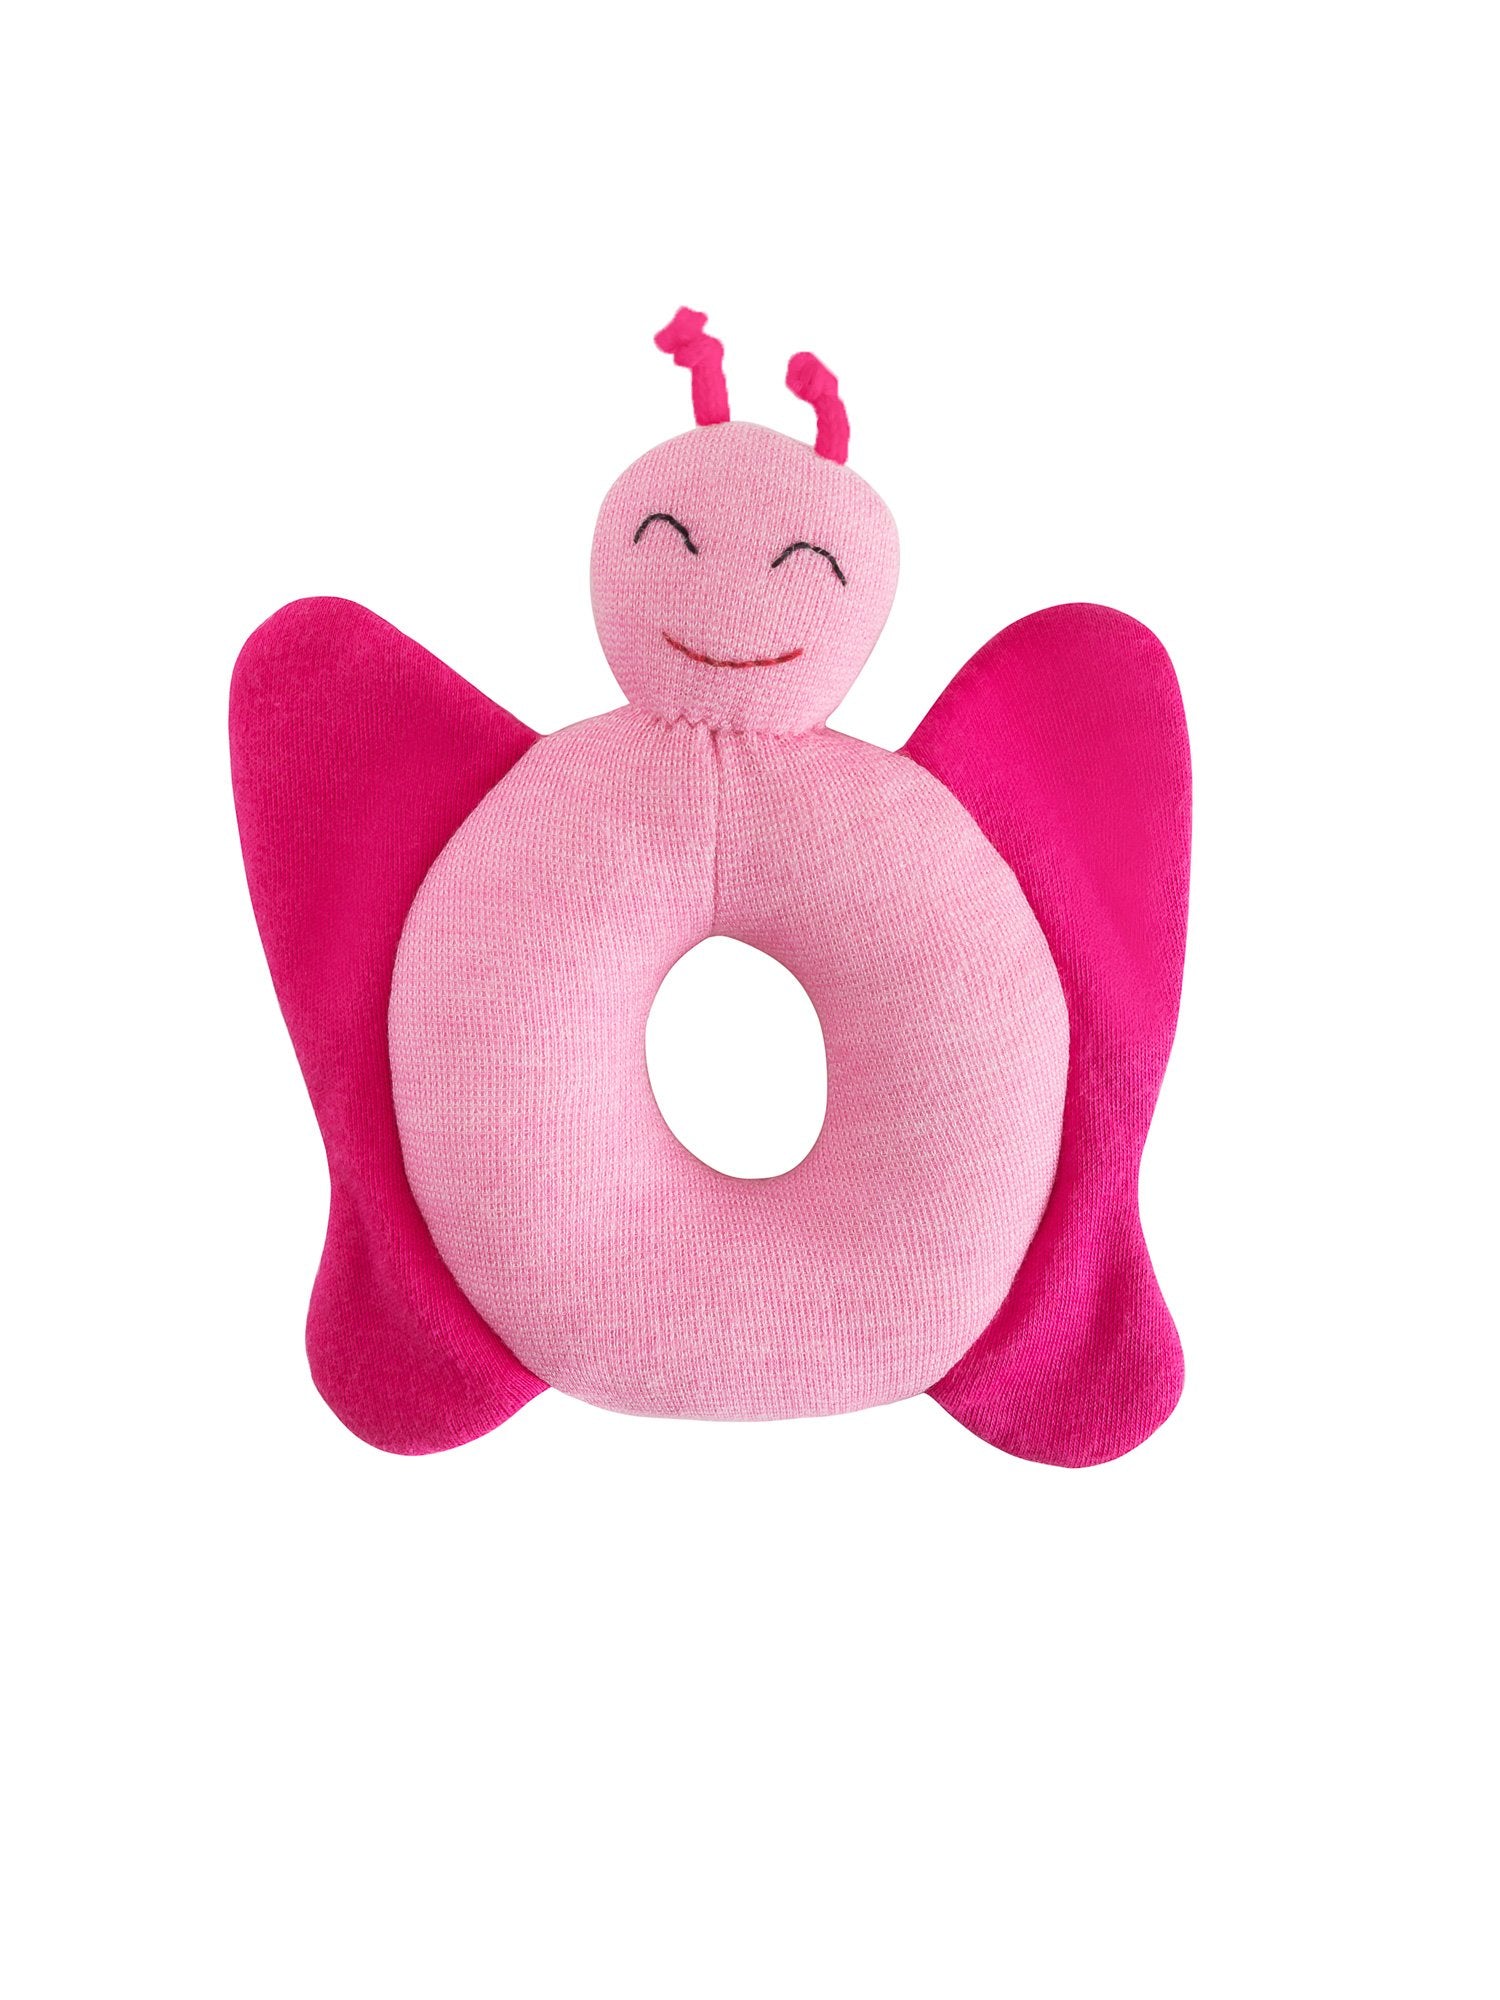 butterfly baby toy